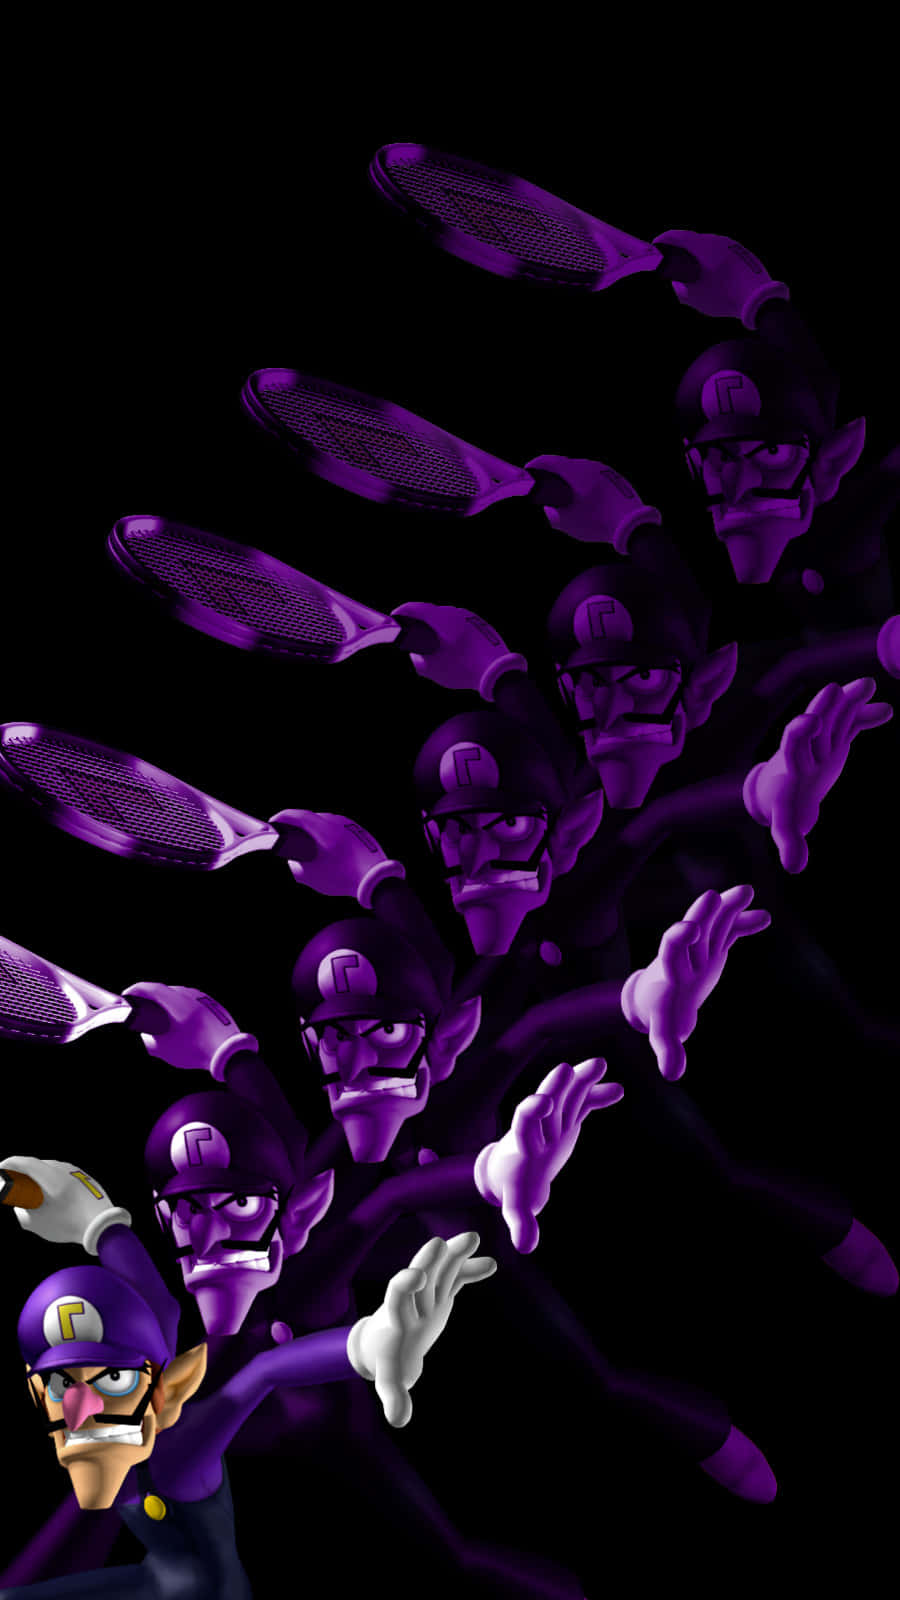 Waluigi Strikes A Pose In His Iconic Purple And Black Outfit.